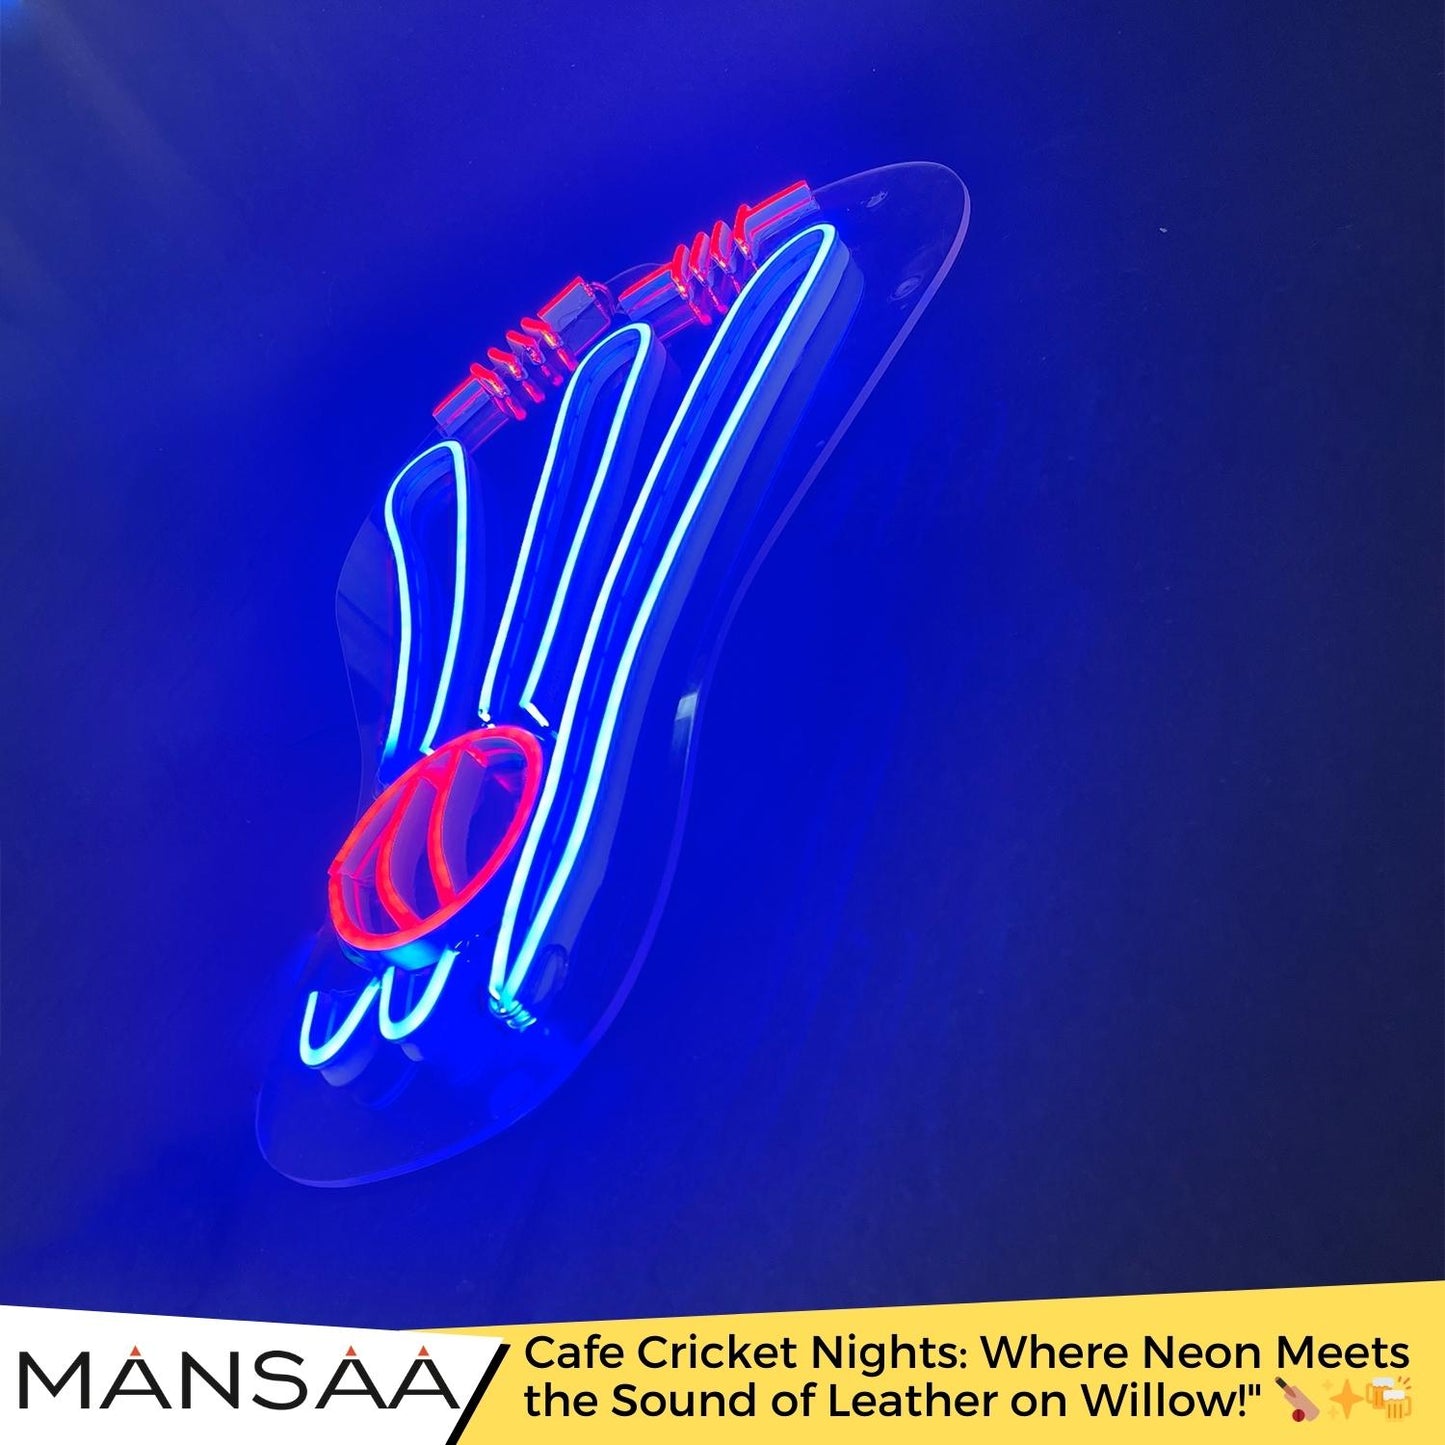 Stump, Bails, and Ball LED Wall NEON Art | Realistic Design | 12x24 Inches | Cricket Fanatics' Collection